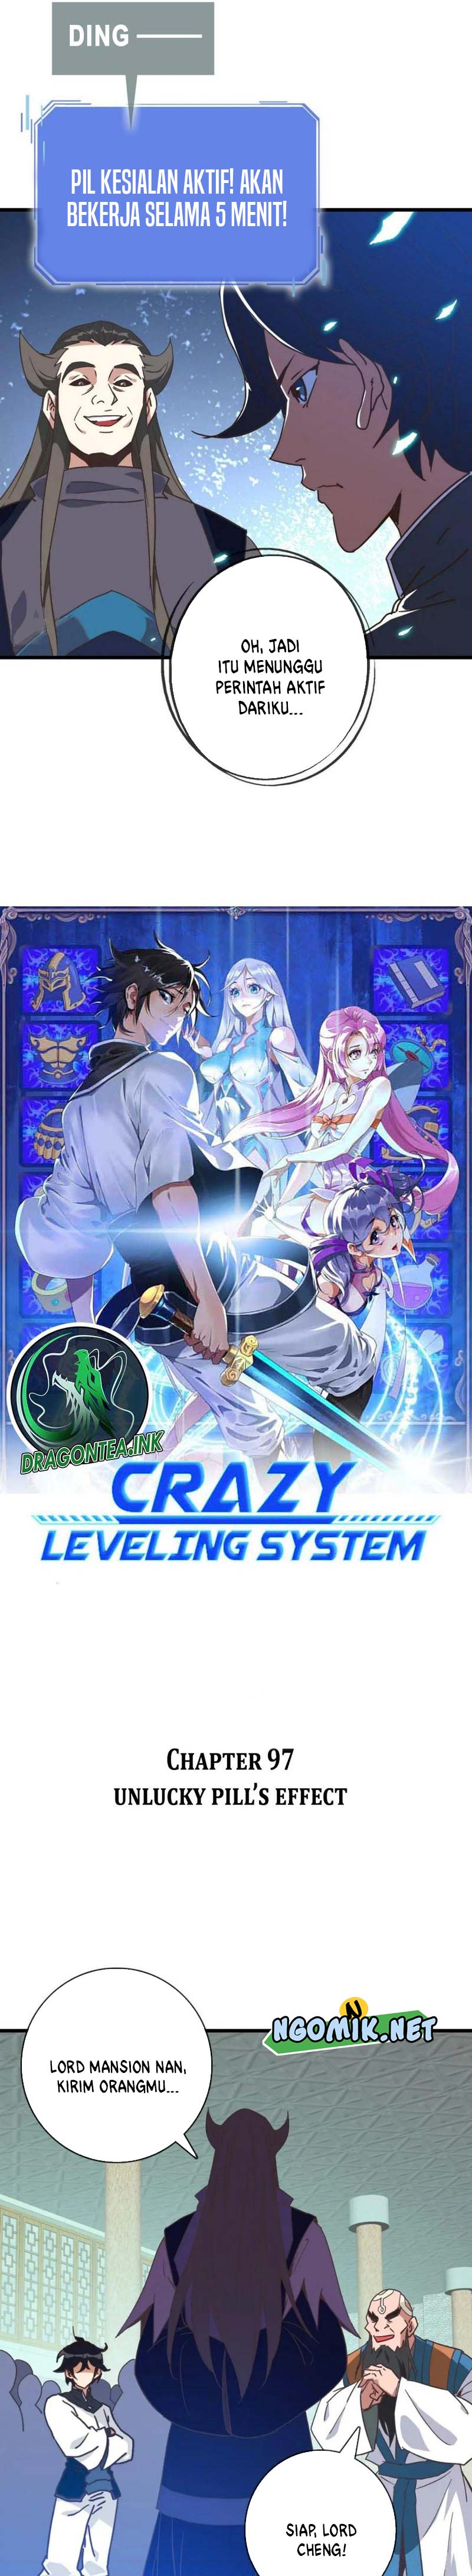 Crazy Leveling System Chapter 97